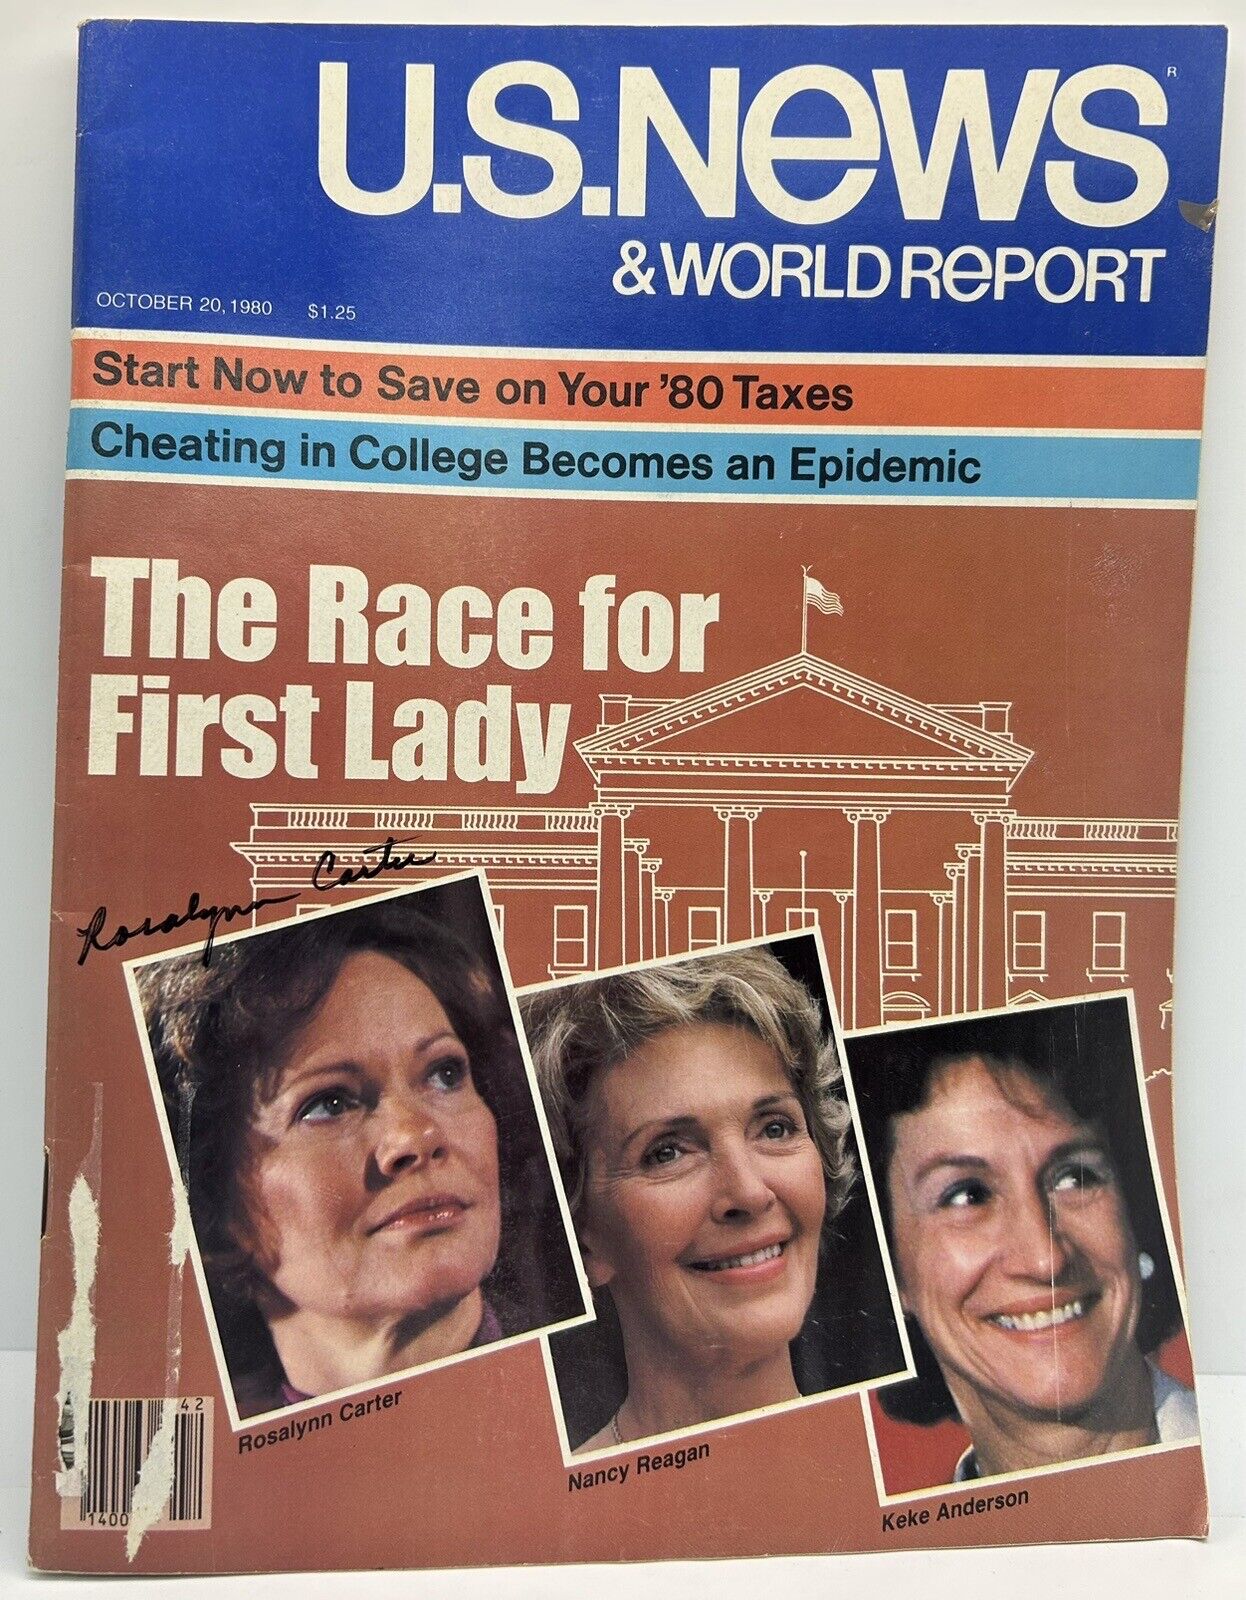 Rosalynn Carter Signed 1980 US News Magazine Autographed First Lady